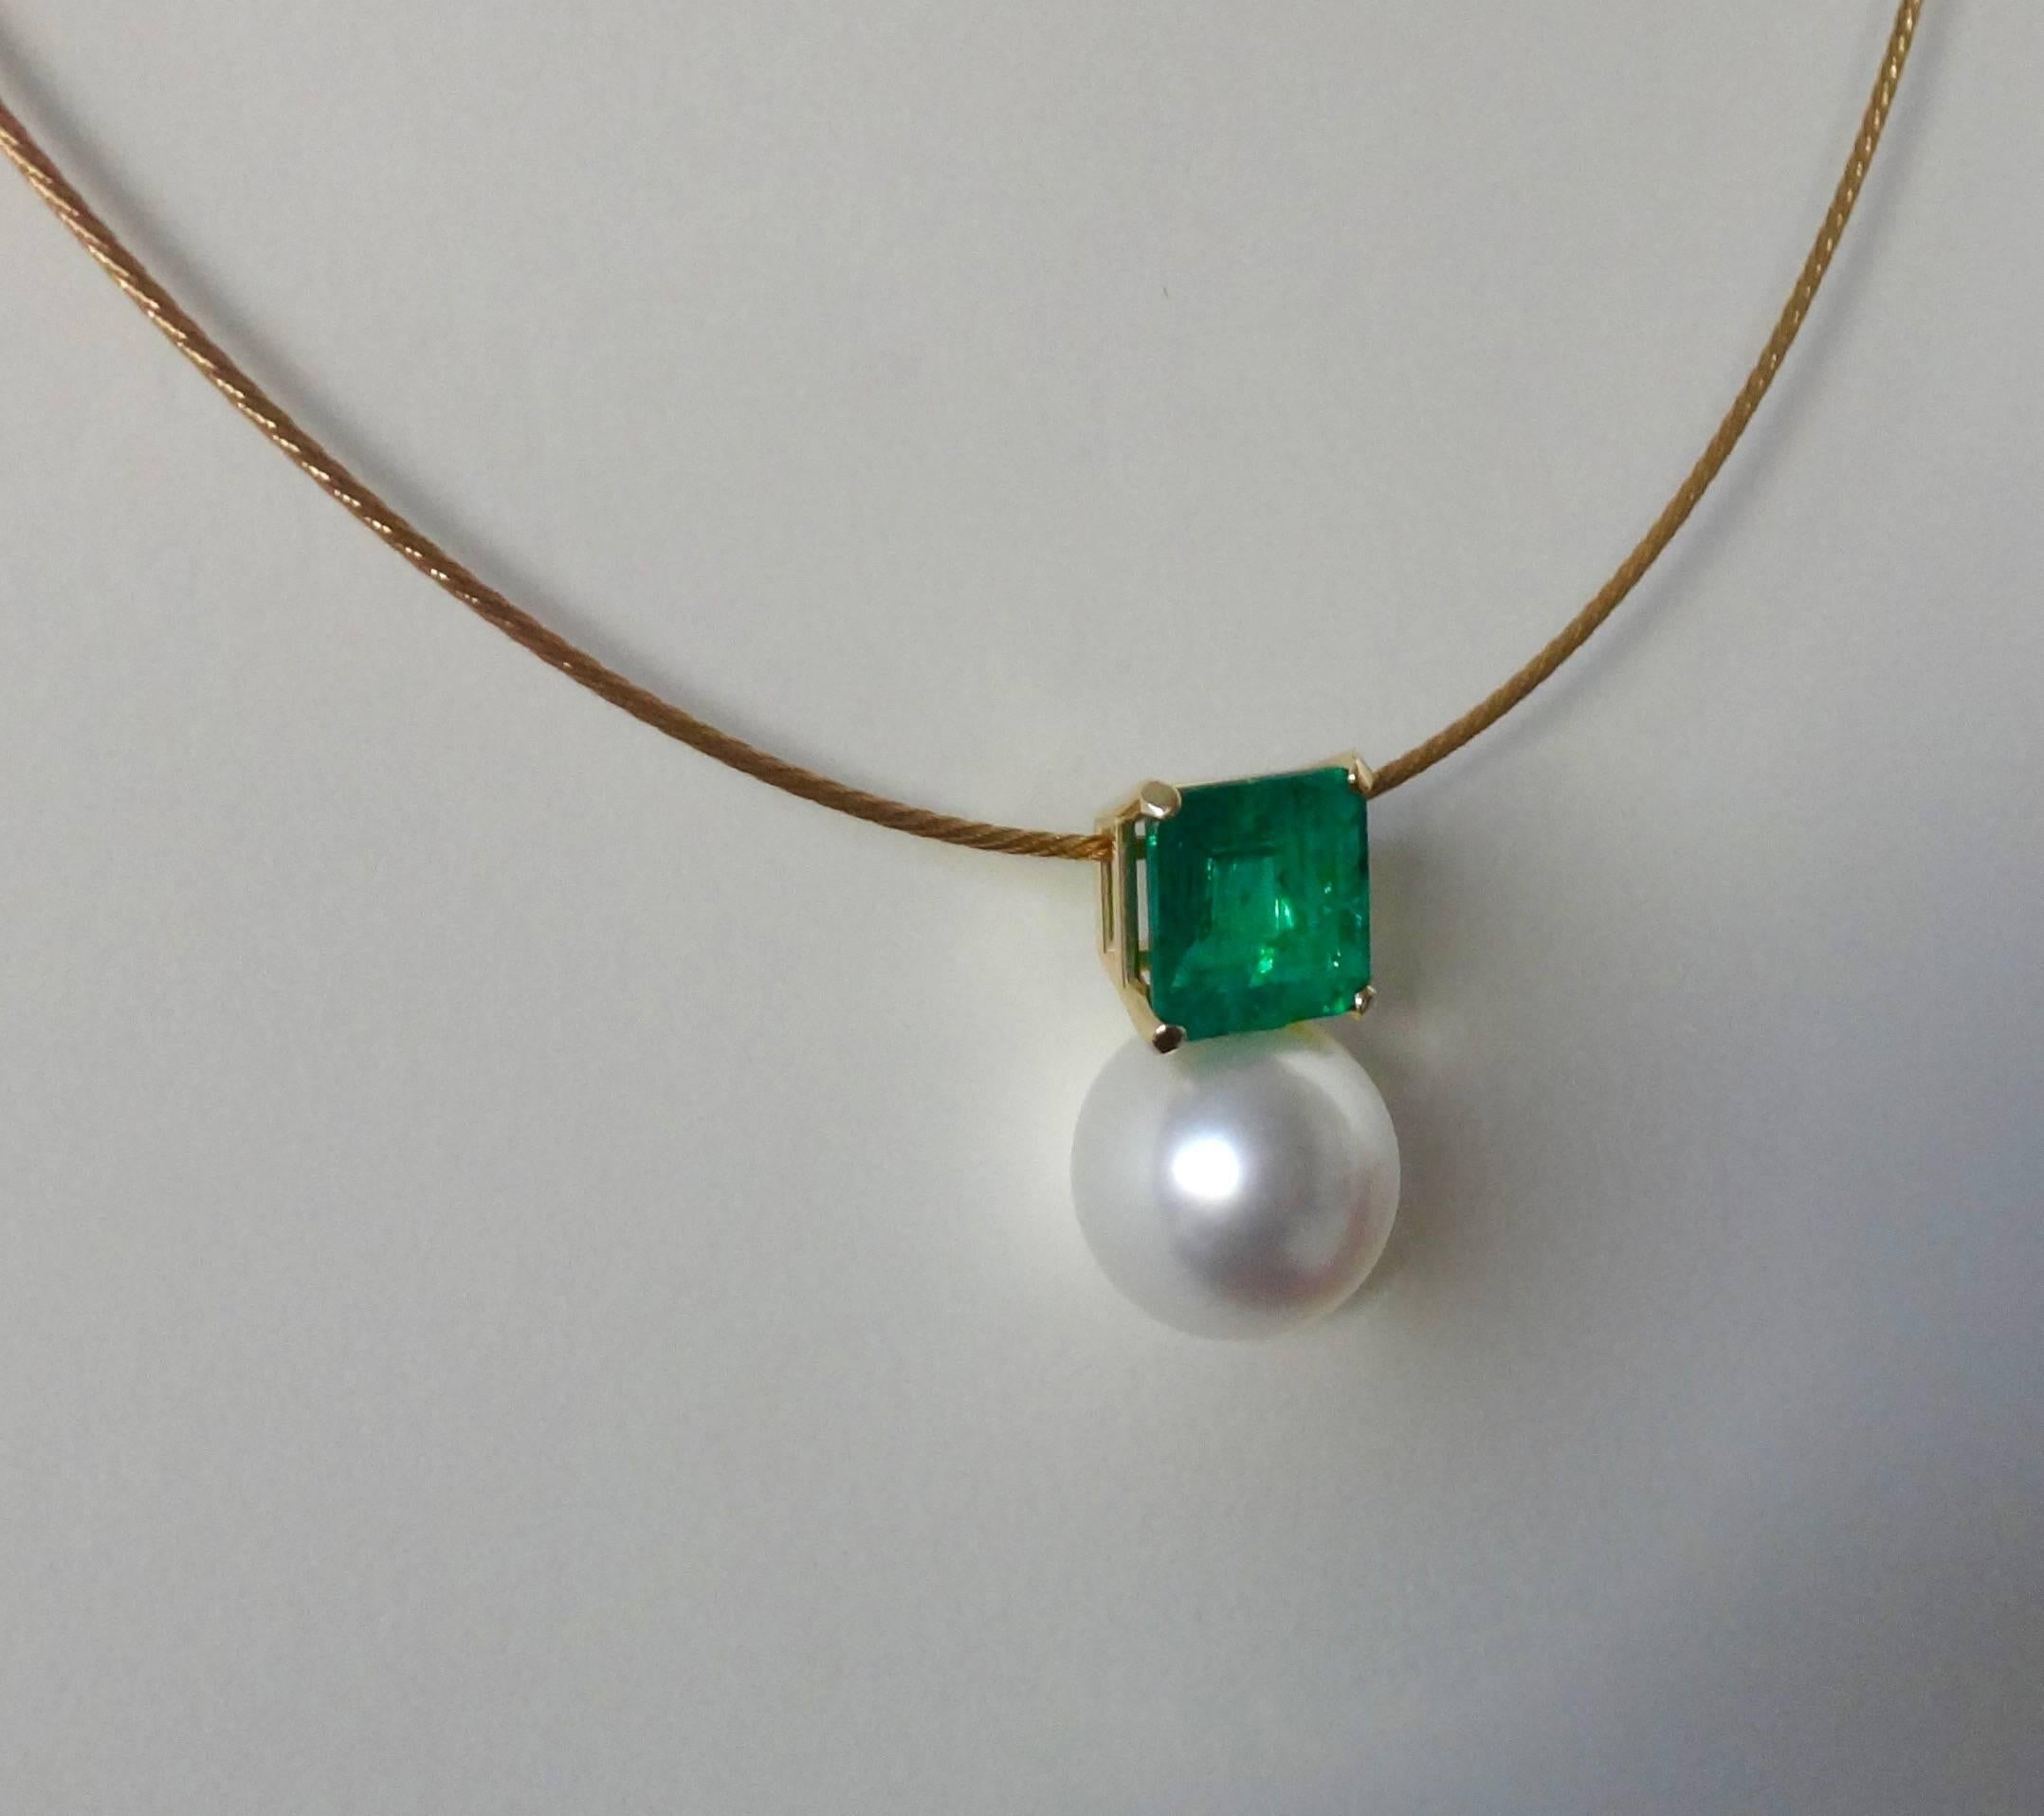 A square cut emerald of 6.41 carats is paired with a 15.5 millimeter, gem quality Paspaley South Seas pearl in this uncomplicated and elegant pendant.  The flashy emerald is of Brazilian origin, has some inclusions typical of the gem and possesses a